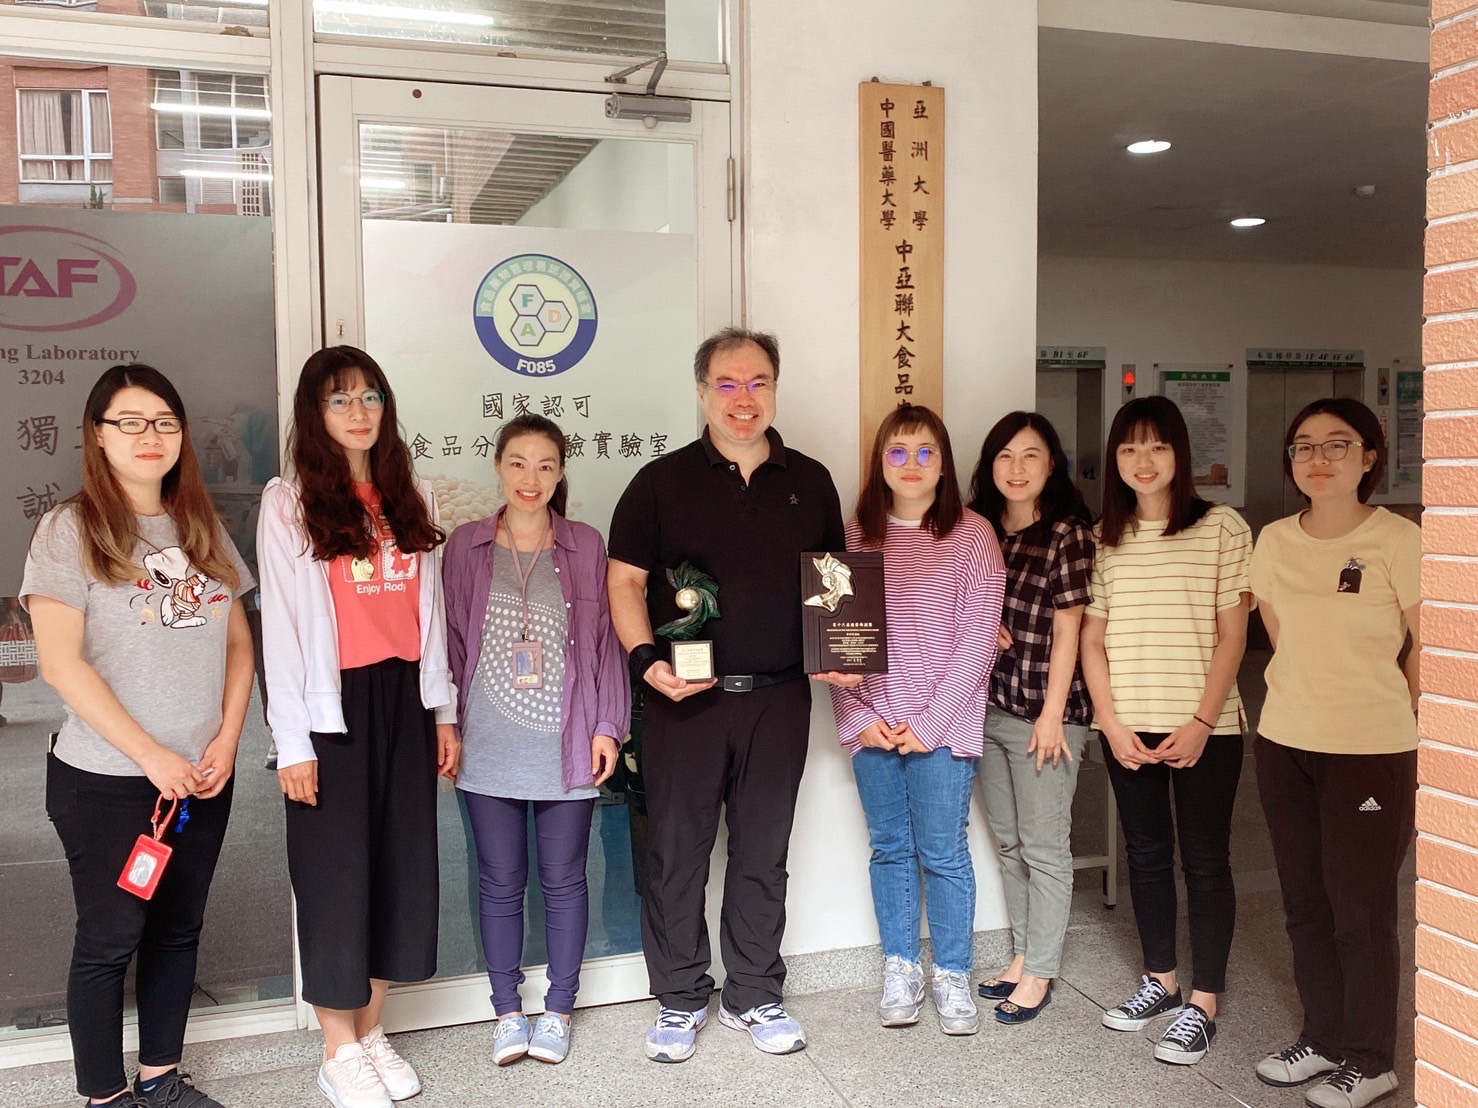 Professor Yu-Cheng Chiang (fourth from the left), Director of Asia University's Food Safety and Inspection Center, and their research team secured an additional 2 "Excelsior Award" this year for their "Detection Chip" and "Temperature Control Chip" technologies, marking a continuous streak of 10 awards over 5 years